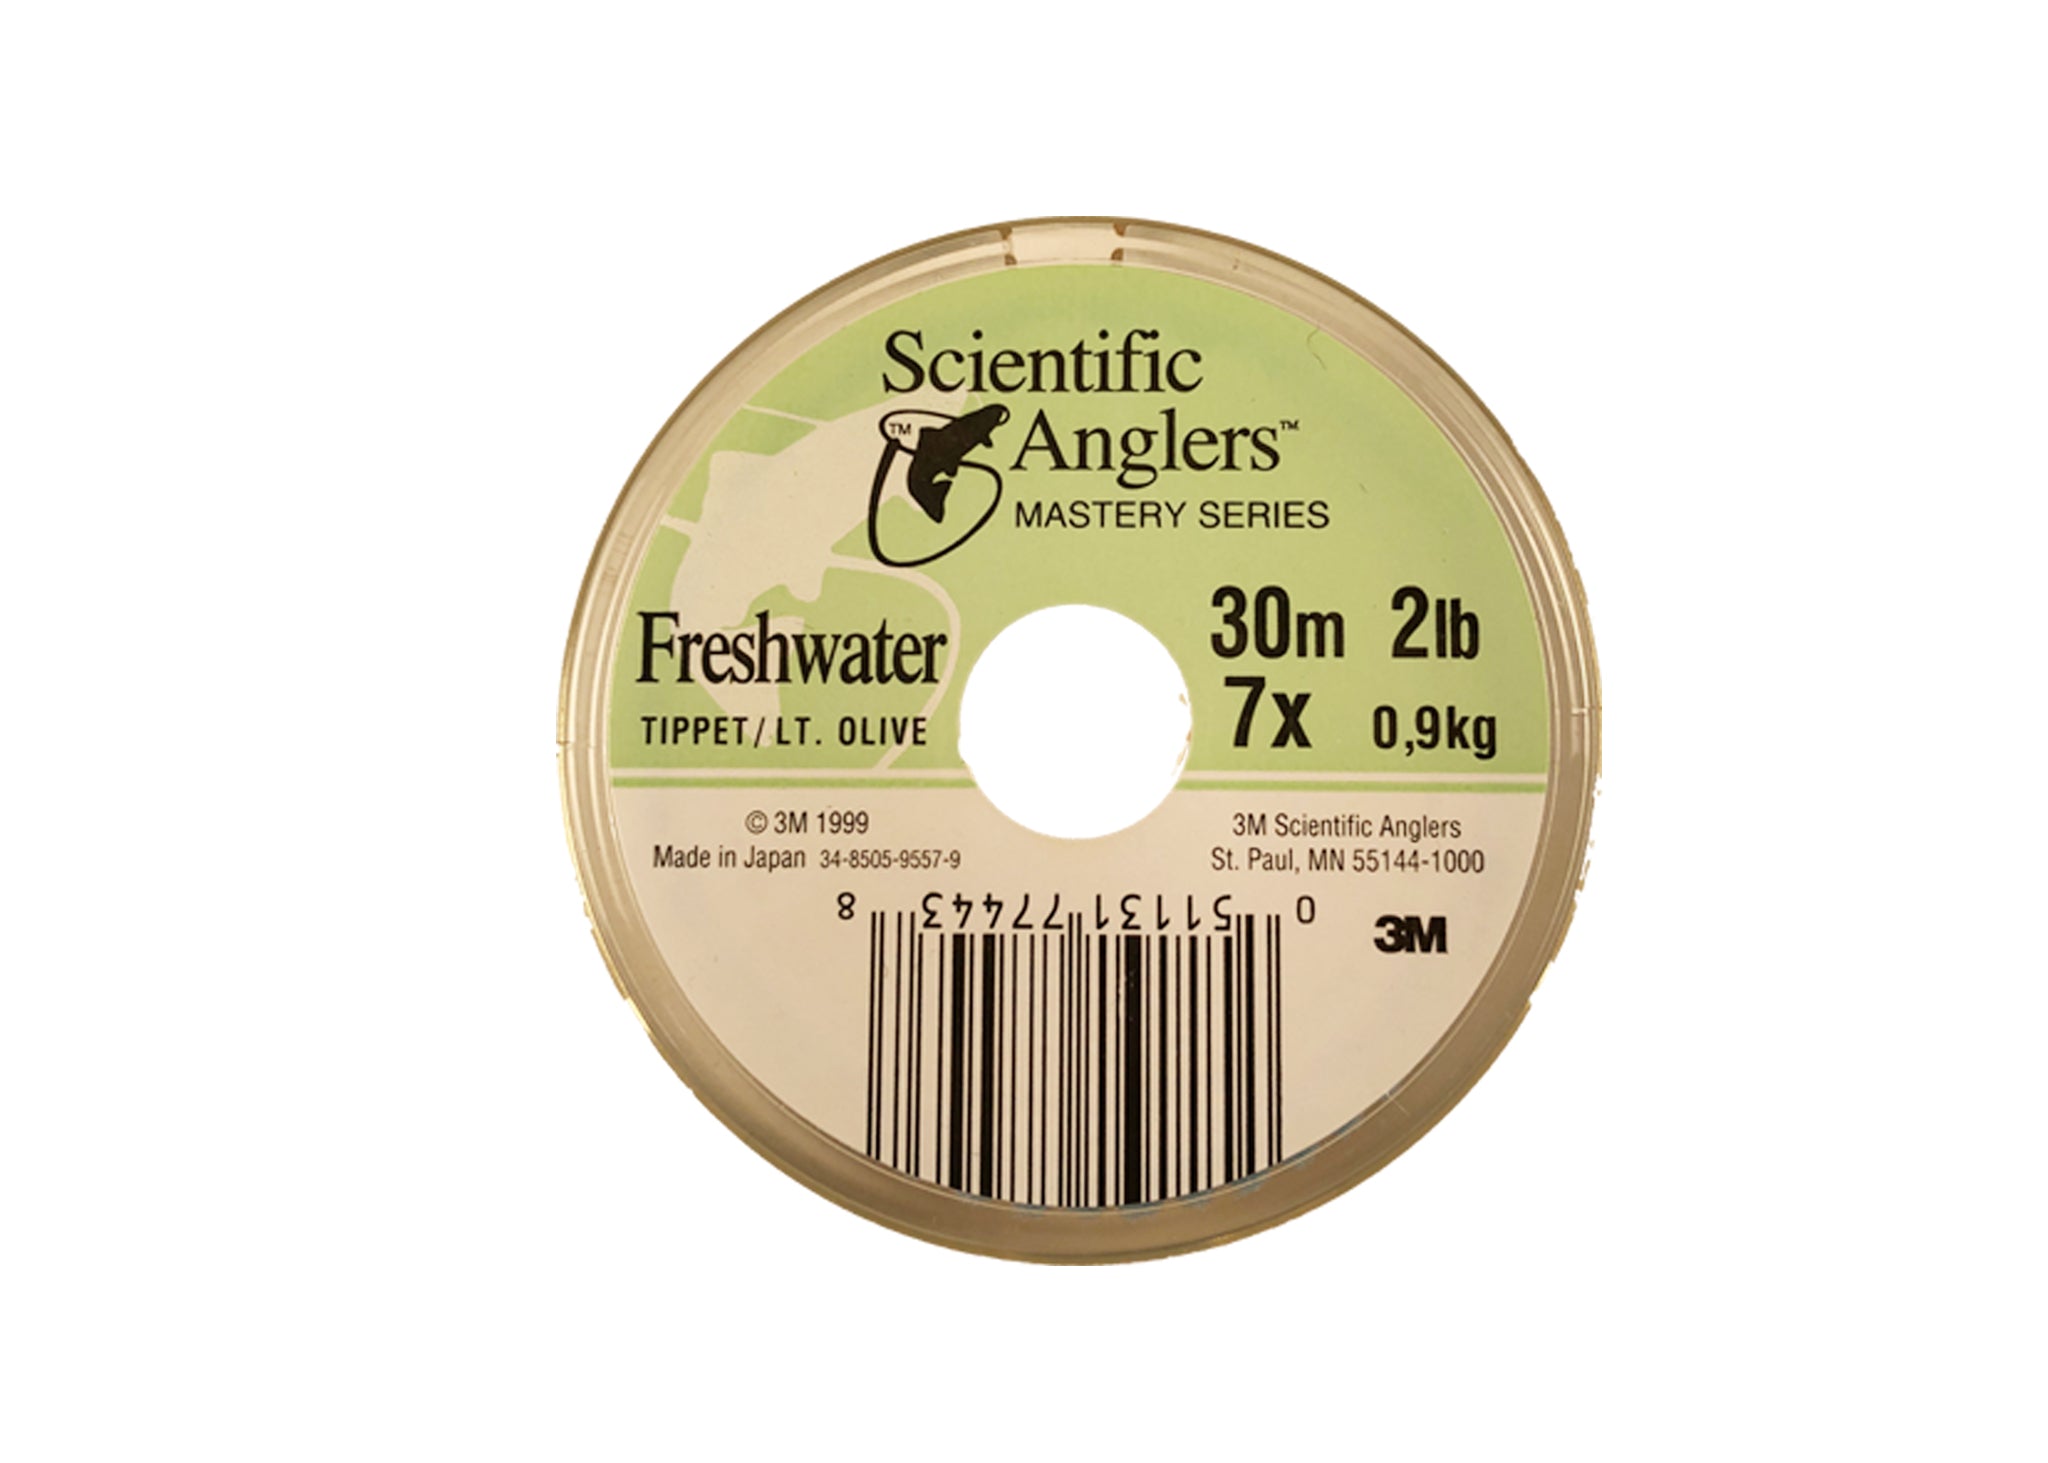 Scientific Anglers Mastery Freshwater Tippet(On Clearance